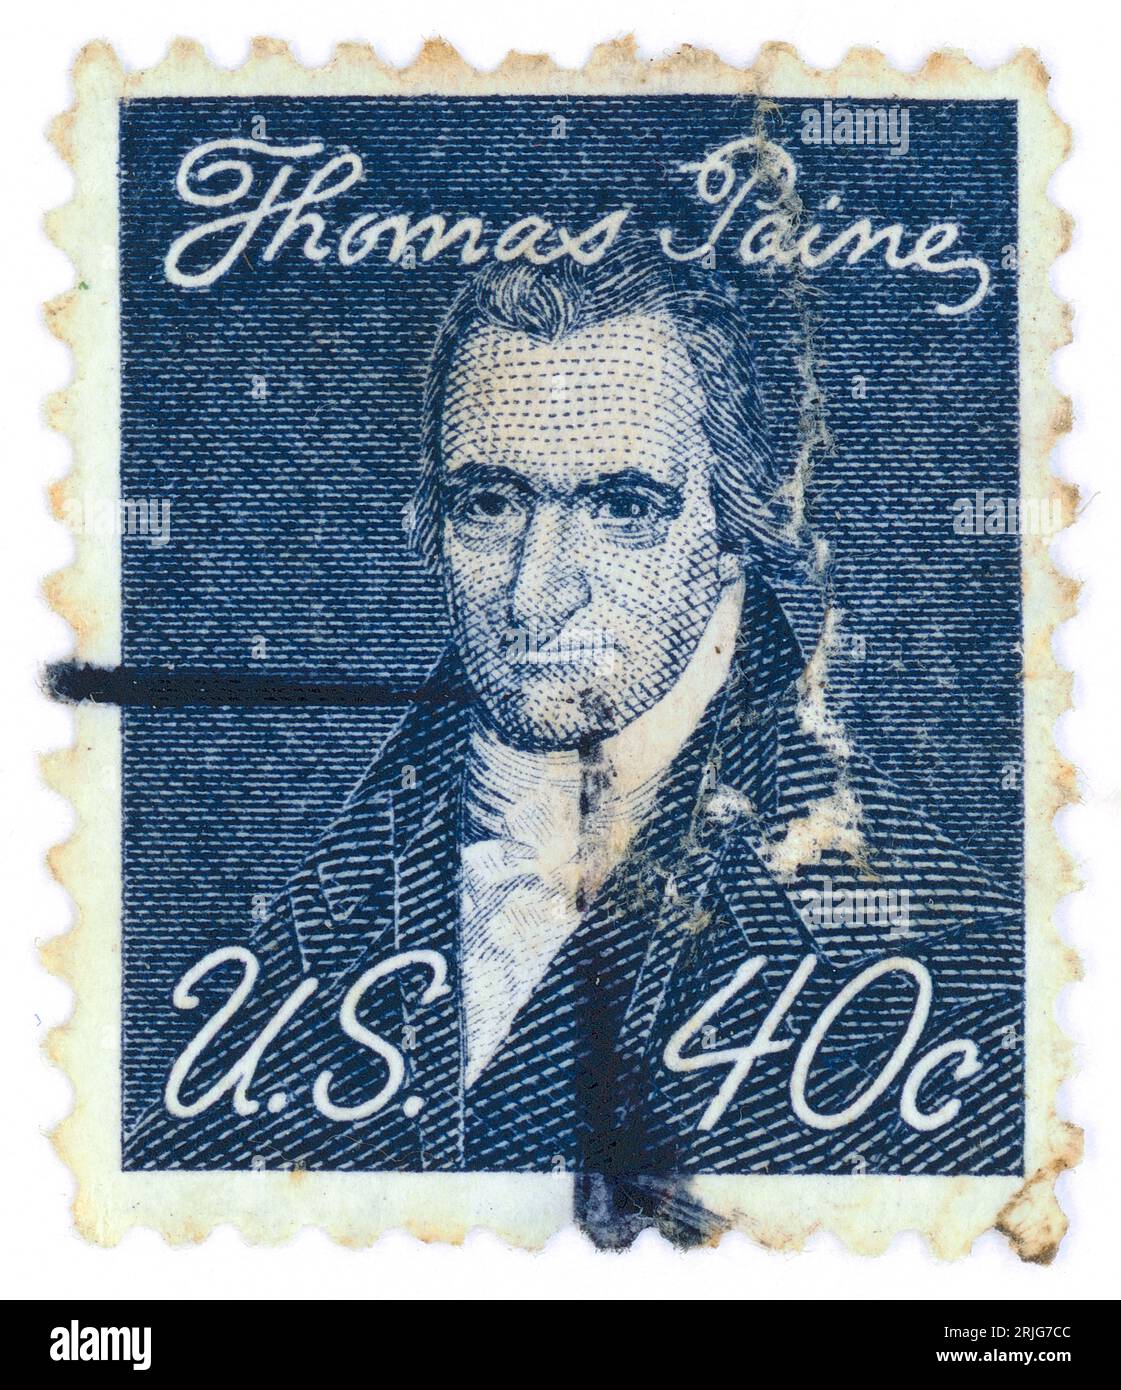 Thomas Paine (born Thomas Pain; 1737 – 1809). Postage stamp issued in the US in 1968. Thomas Paine was an English-born American Founding Father, political activist, philosopher, political theorist, and revolutionary. He authored Common Sense (1776) and The American Crisis (1776–1783), two of the most influential pamphlets at the start of the American Revolution, and he helped to inspire the Patriots in 1776 to declare independence from Great Britain. His ideas reflected Enlightenment-era ideals of human rights. Stock Photo